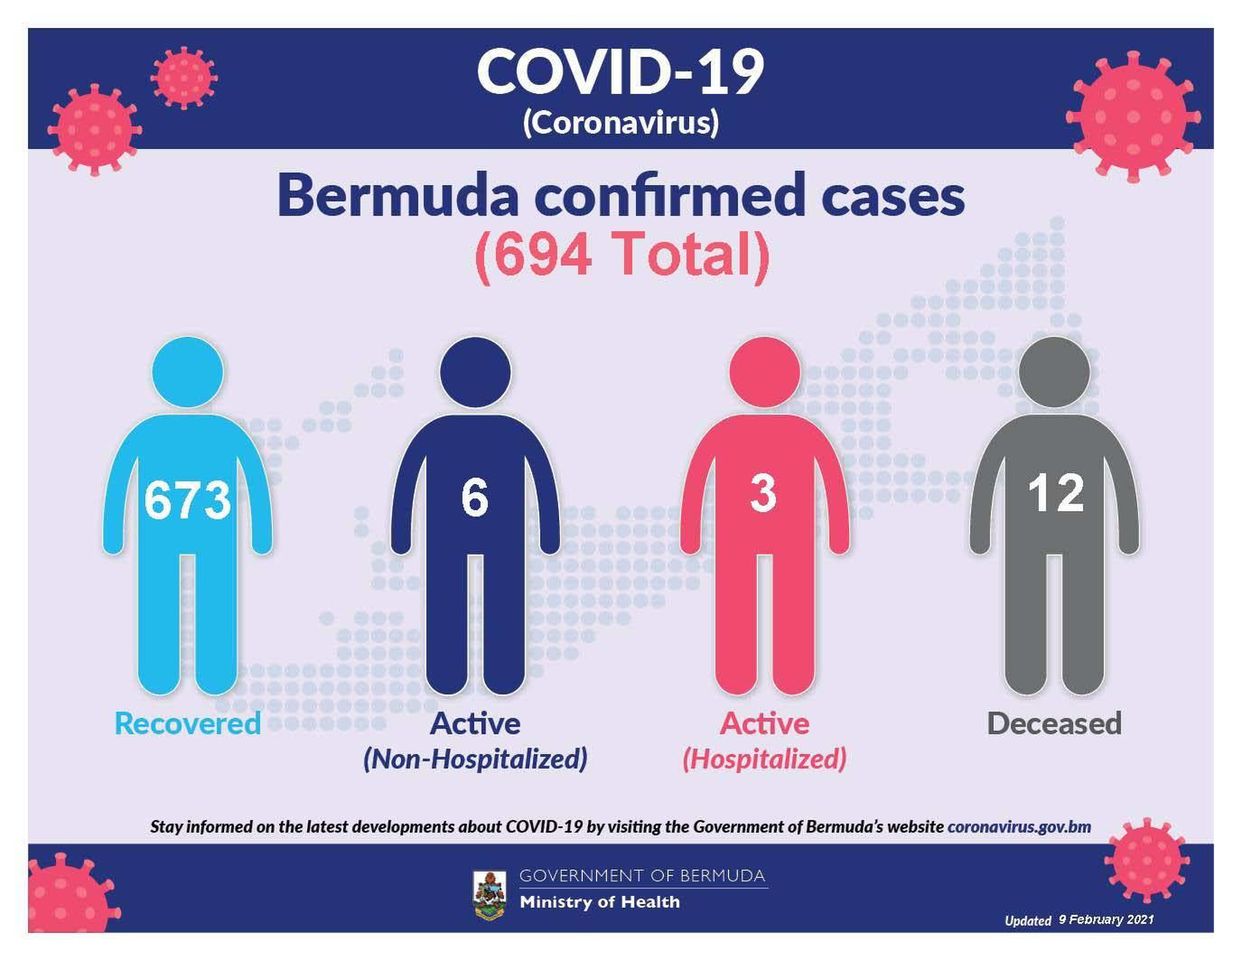 250 tests result no new COVID-19 cases in Bermuda, 9 February